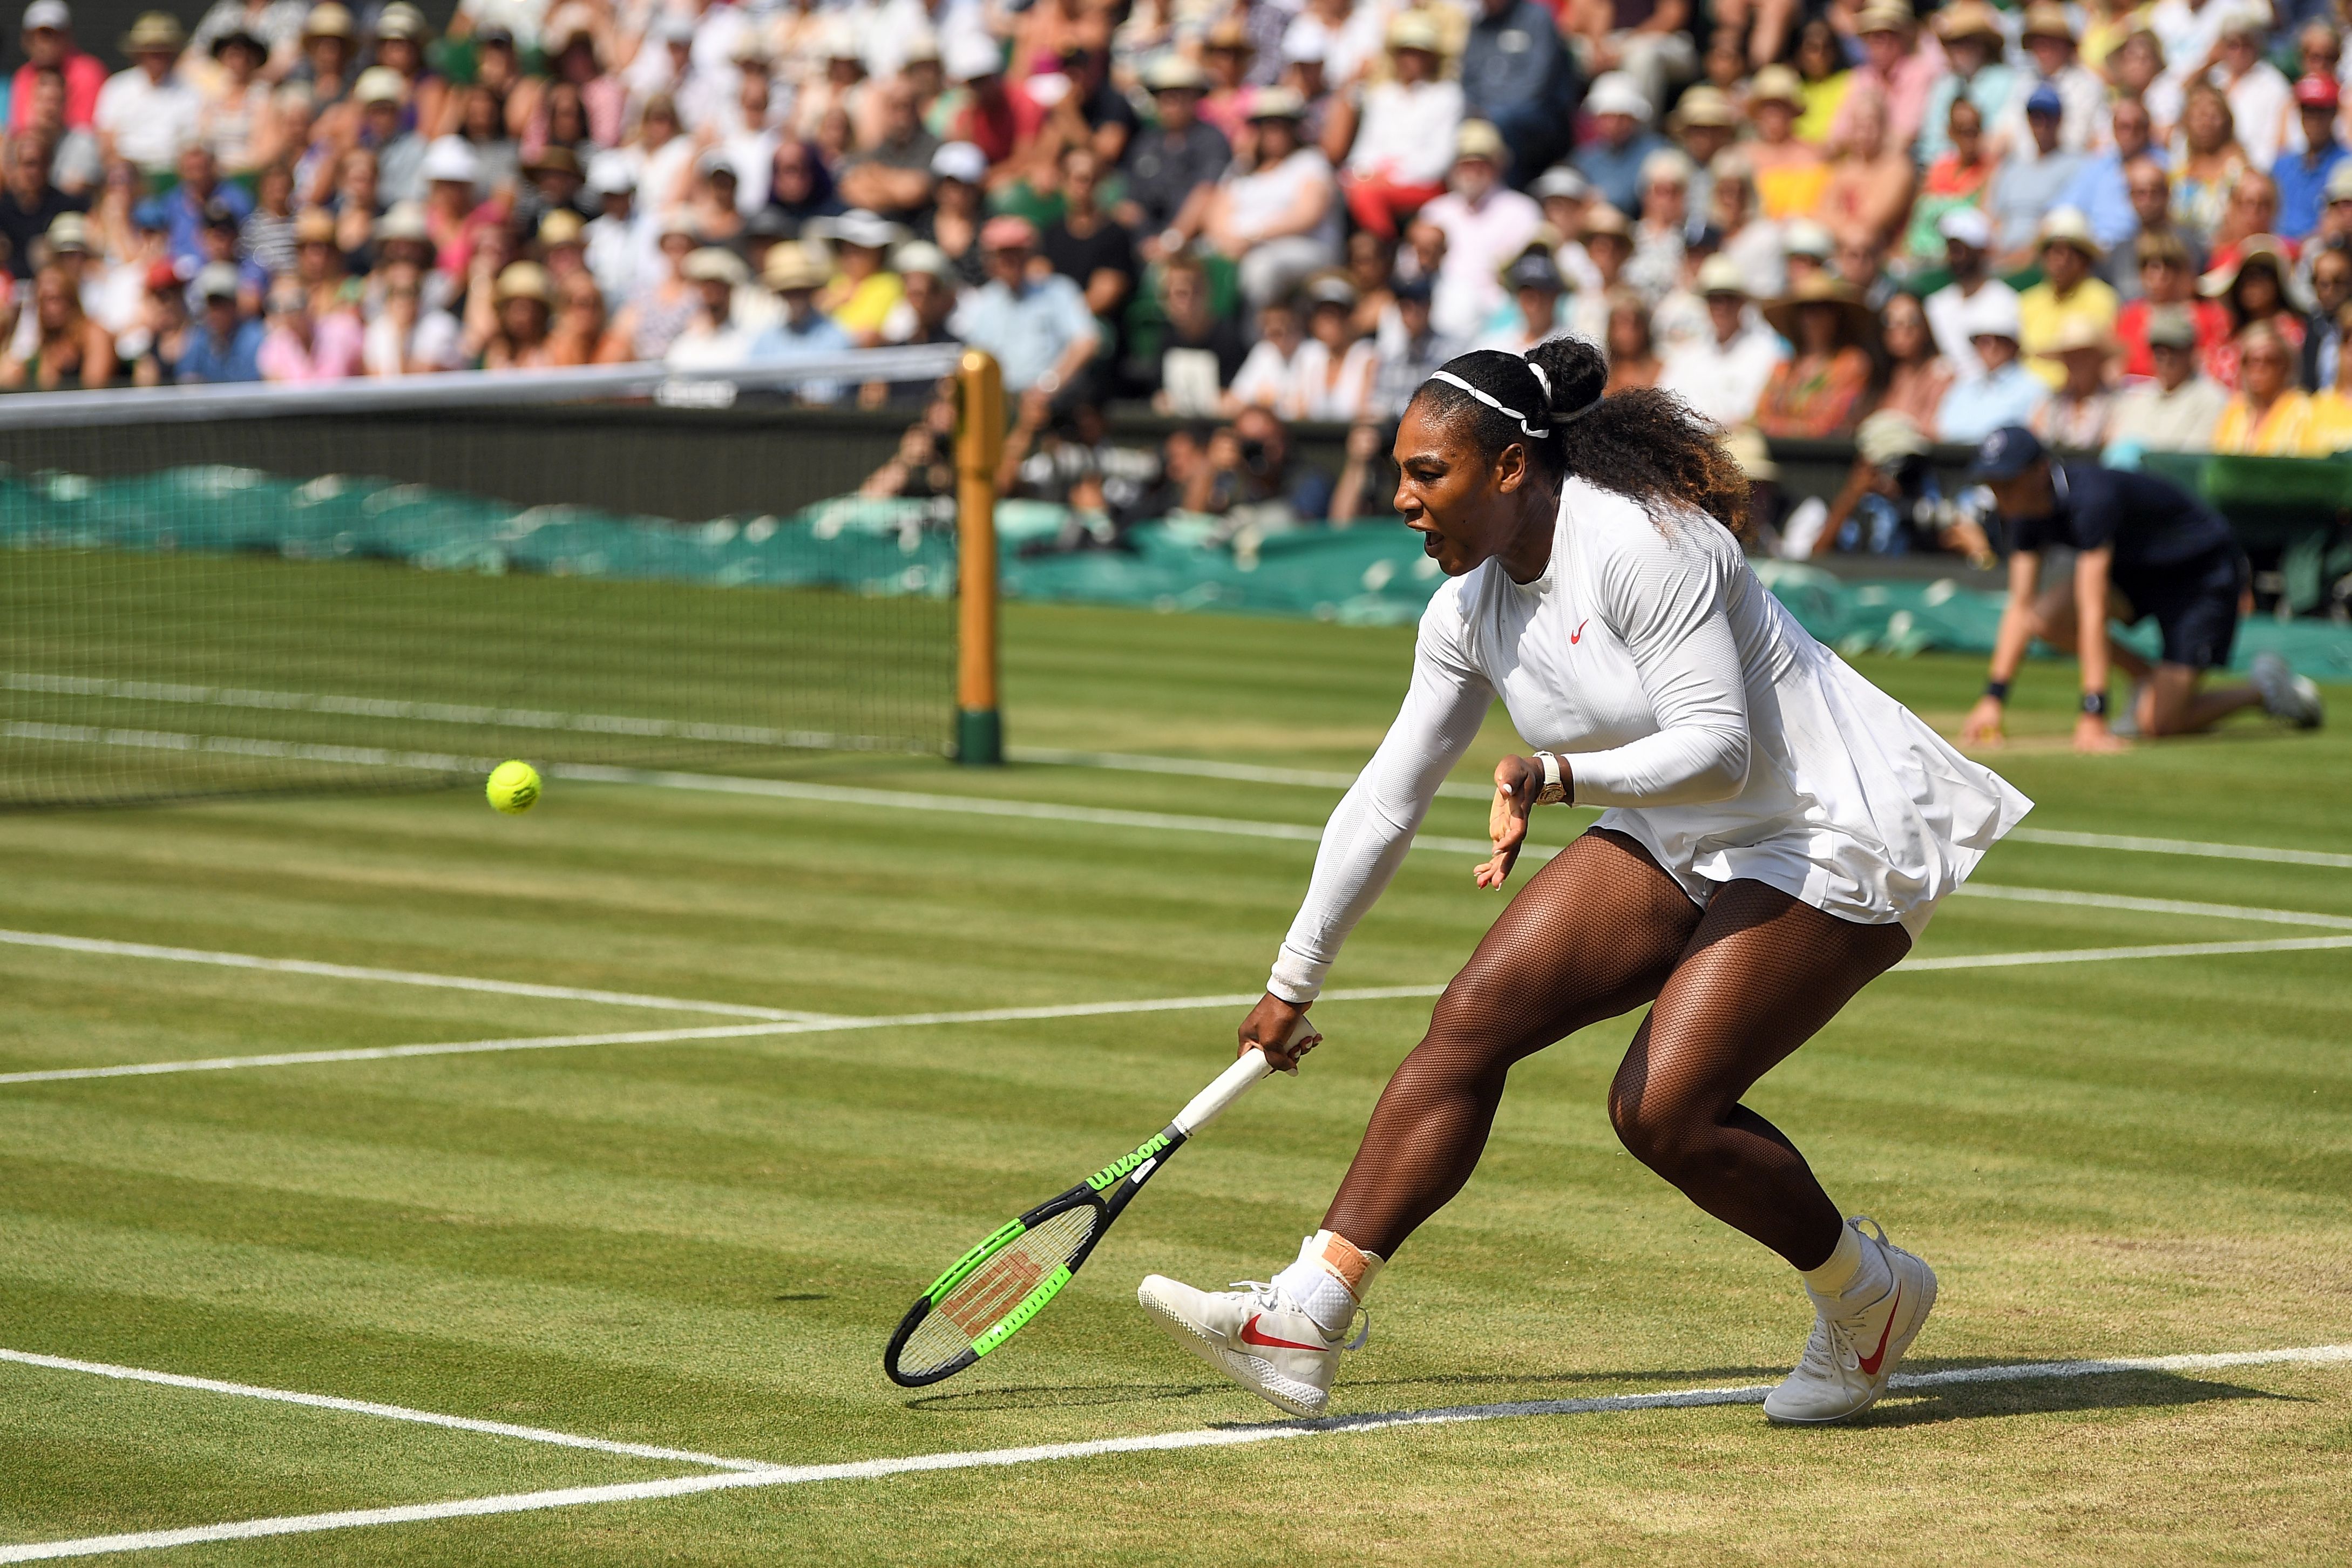 How to Watch Serena Williams in the 2018 Wimbledon Womens Singles Final for Free Online